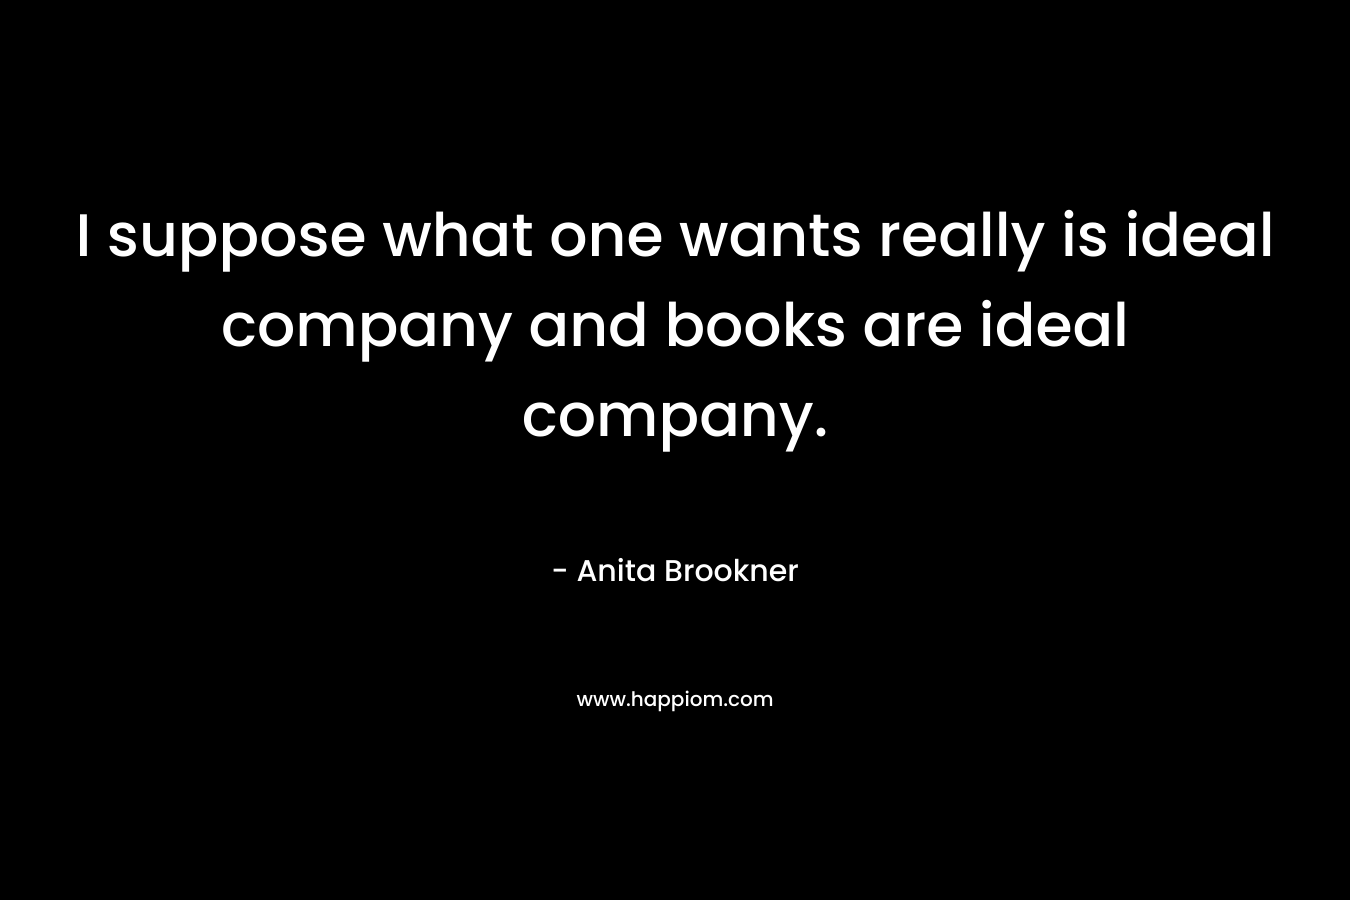 I suppose what one wants really is ideal company and books are ideal company.